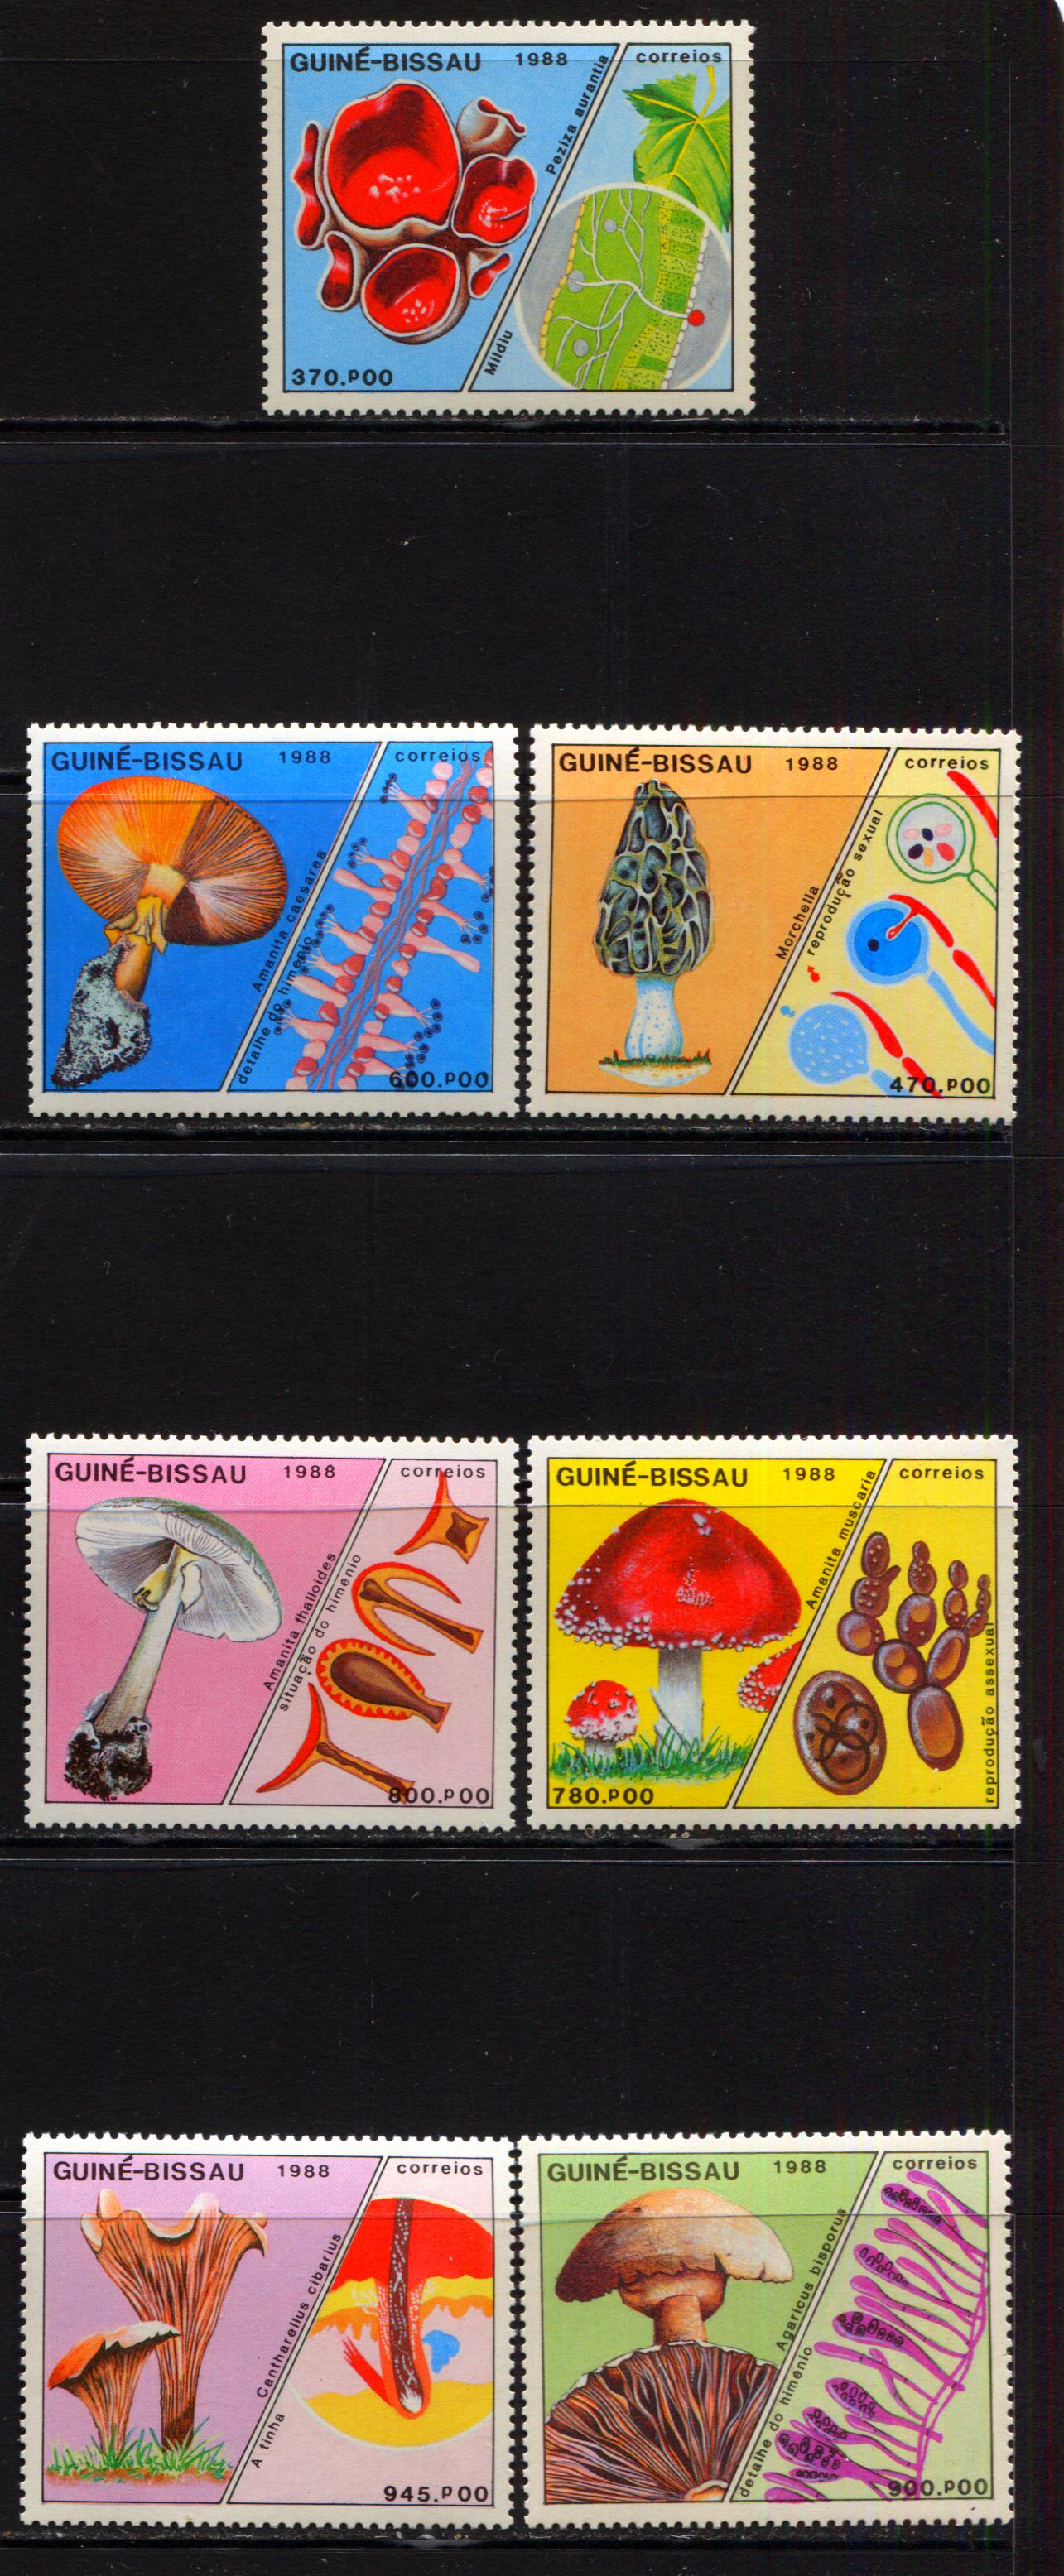 Lot 249 Guinea-Bissau SC#765-771 1988 Mushrooms Issue, A VFNH Range Of Singles, 2017 Scott Cat. $32.75 USD, Click on Listing to See ALL Pictures